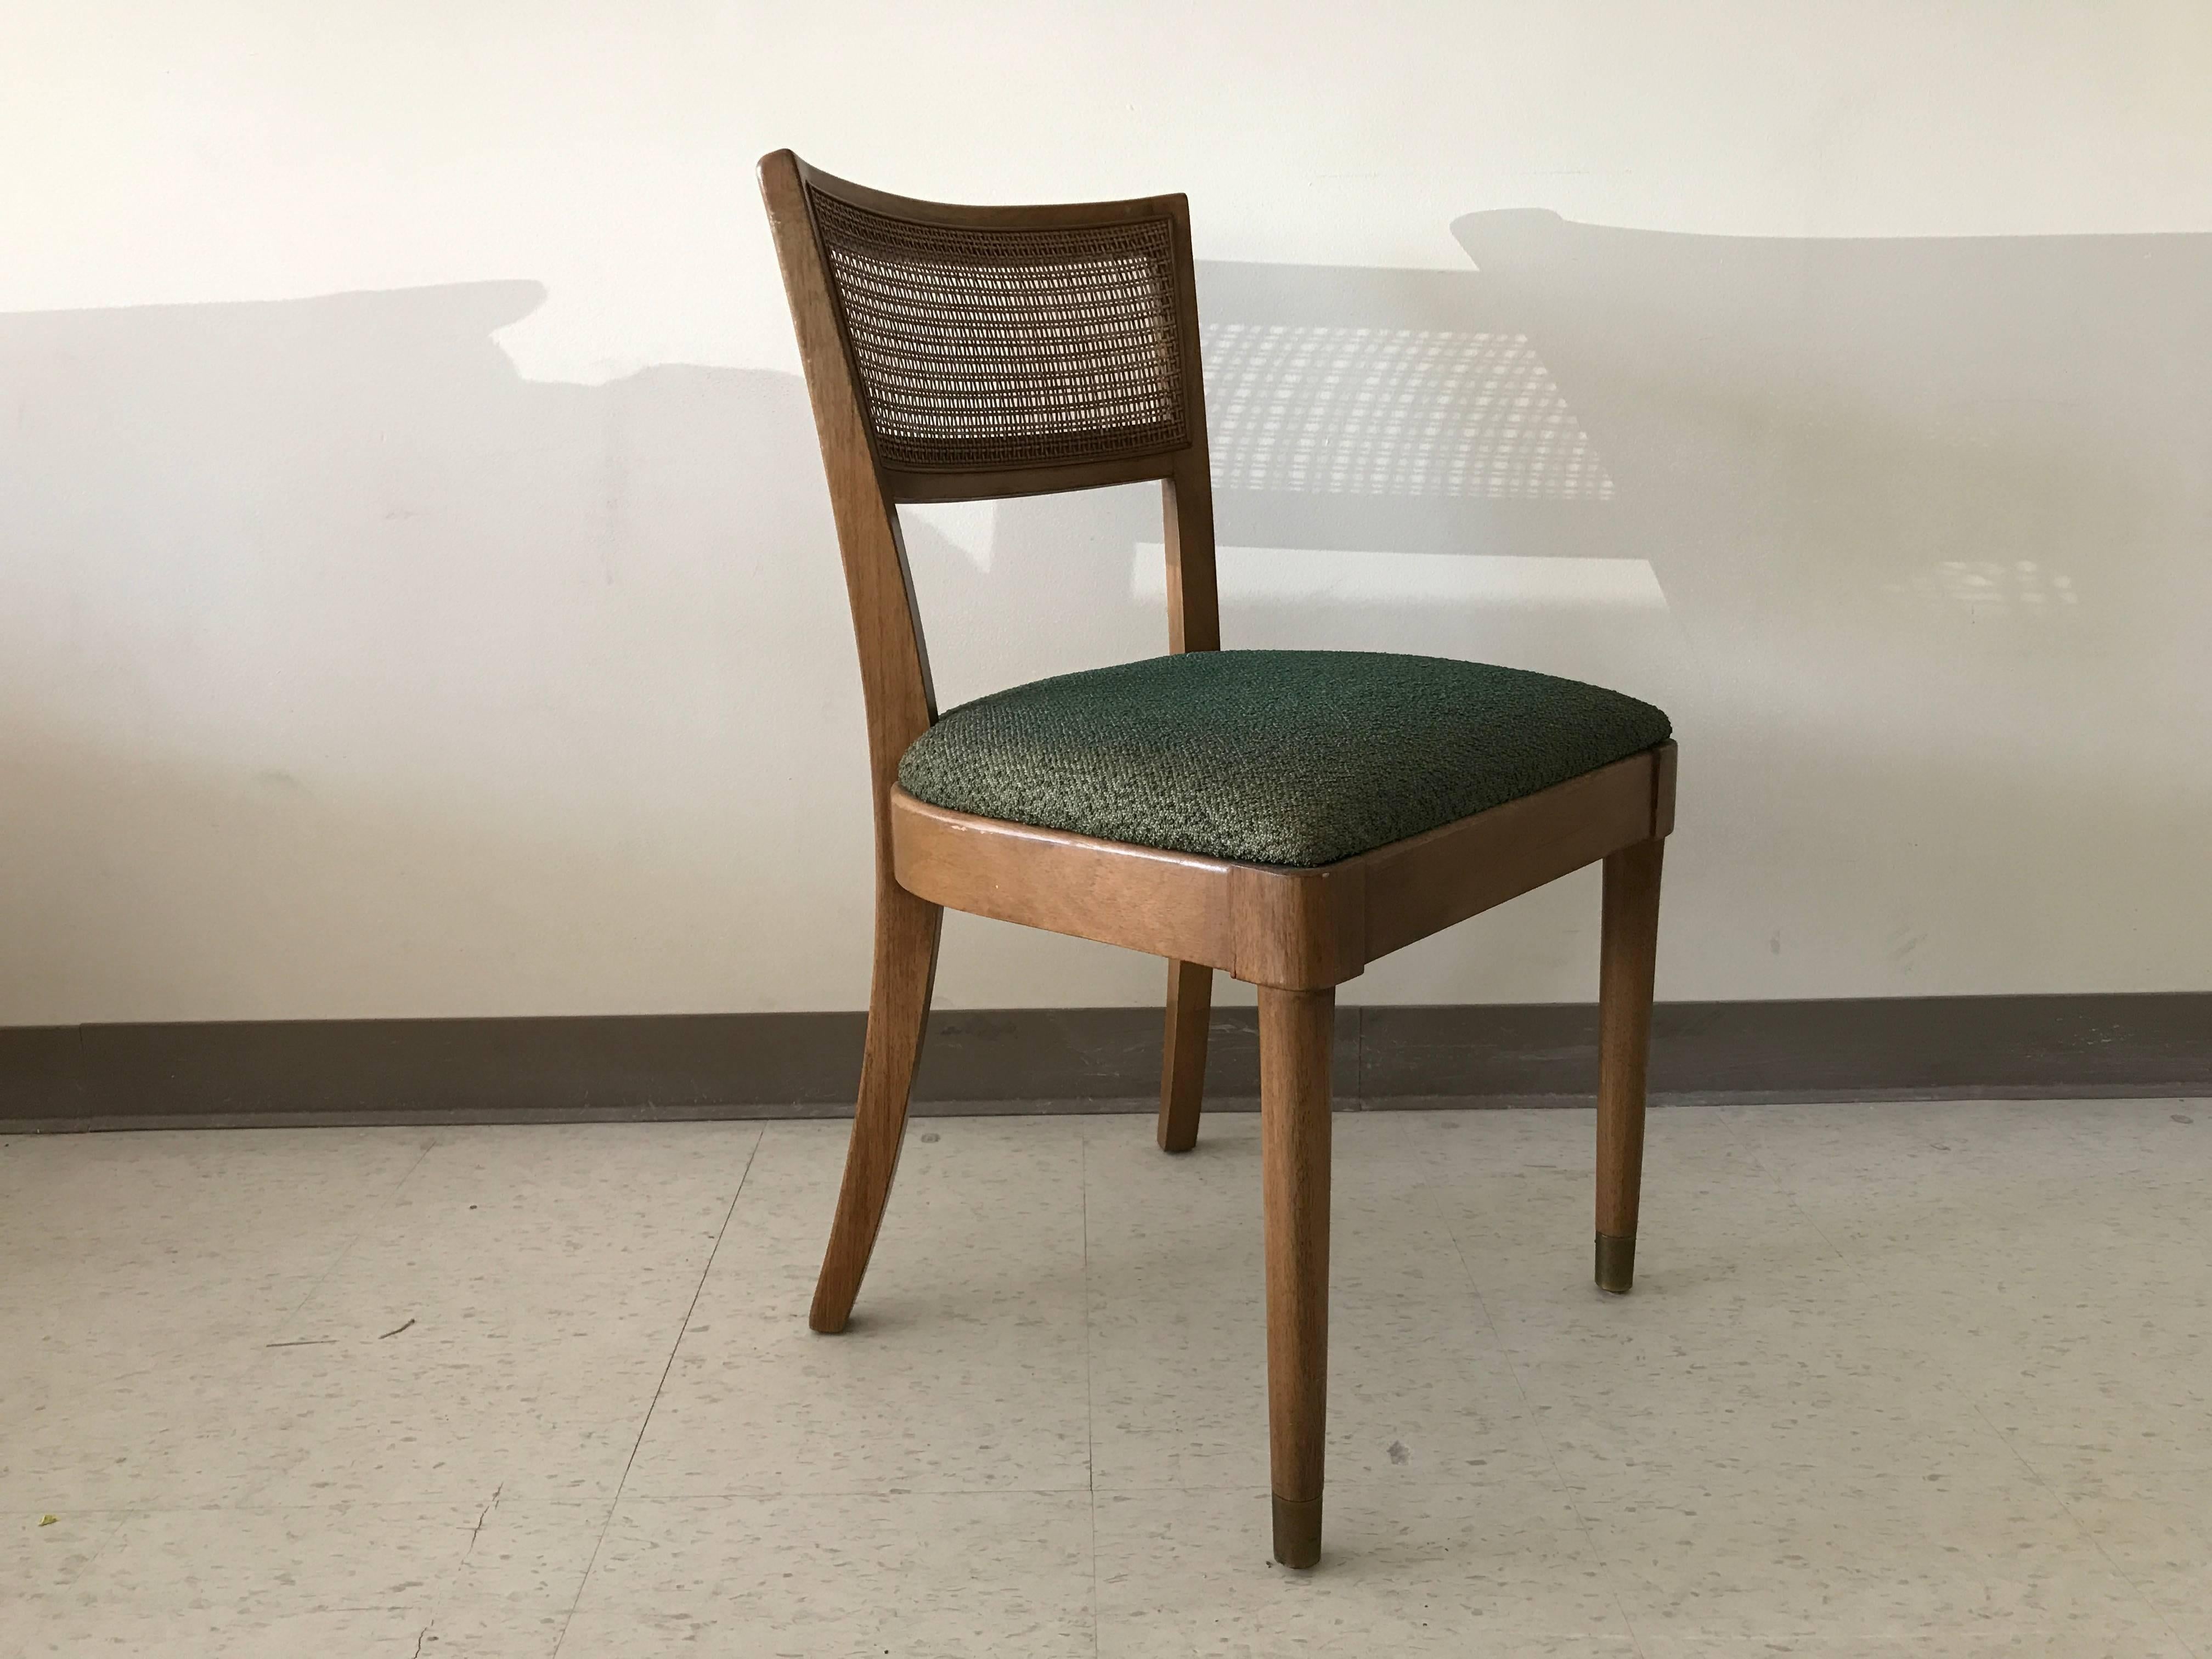 Offered is a stunning set of six, 1960s Drexel walnut dining chairs. Each chair has a cane upper backing, original green fabric, and brass feet cap.